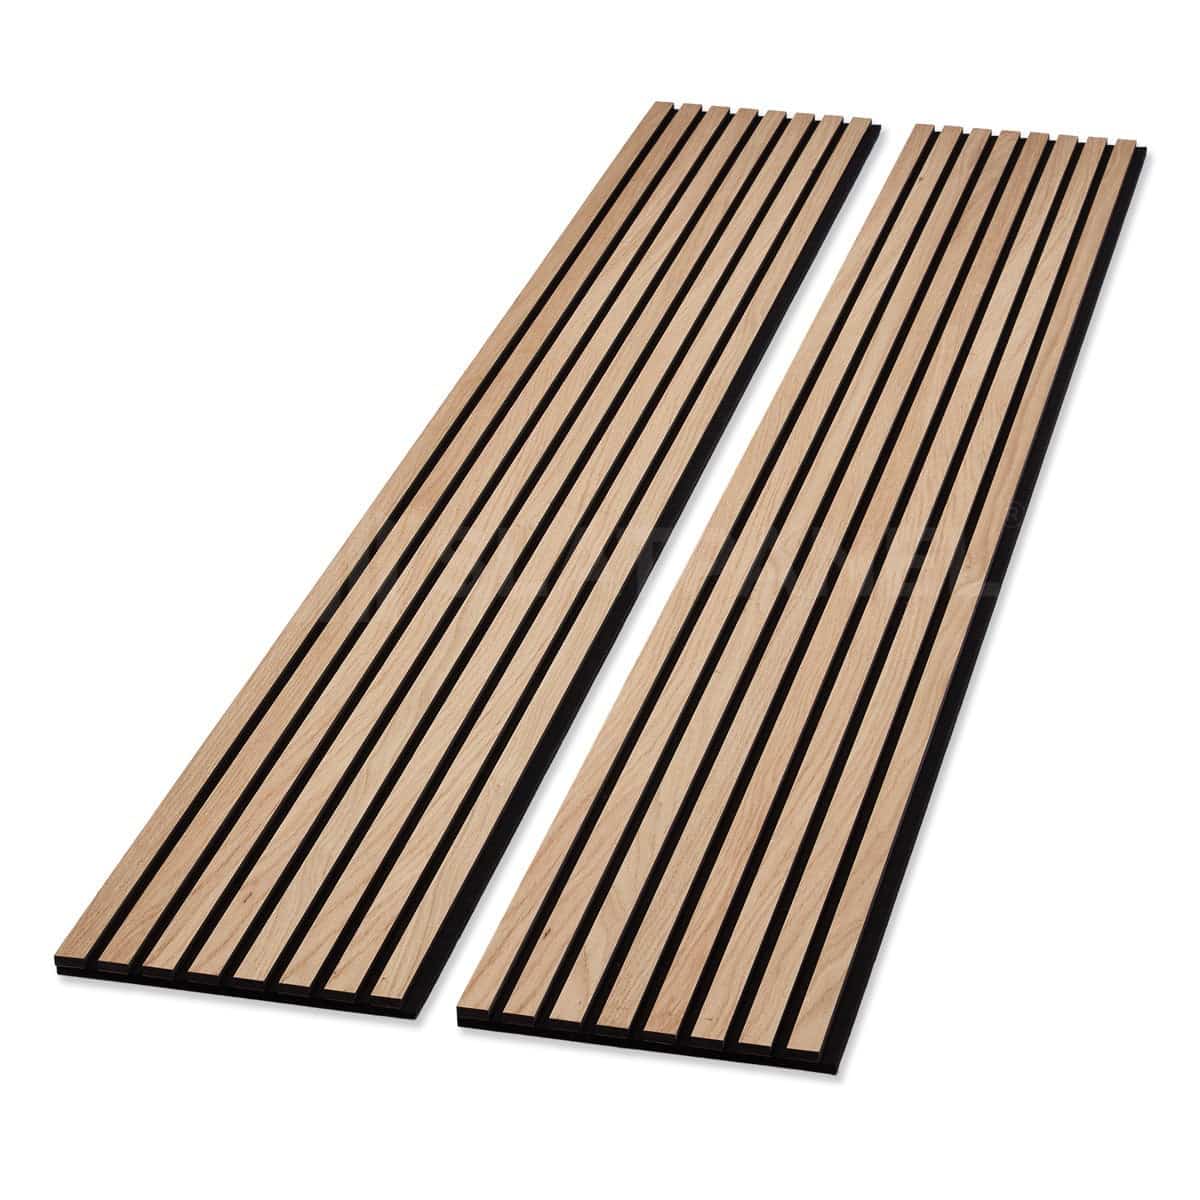 Acoustic Wood Slat Wall Panel by WPH® (2-Pack)